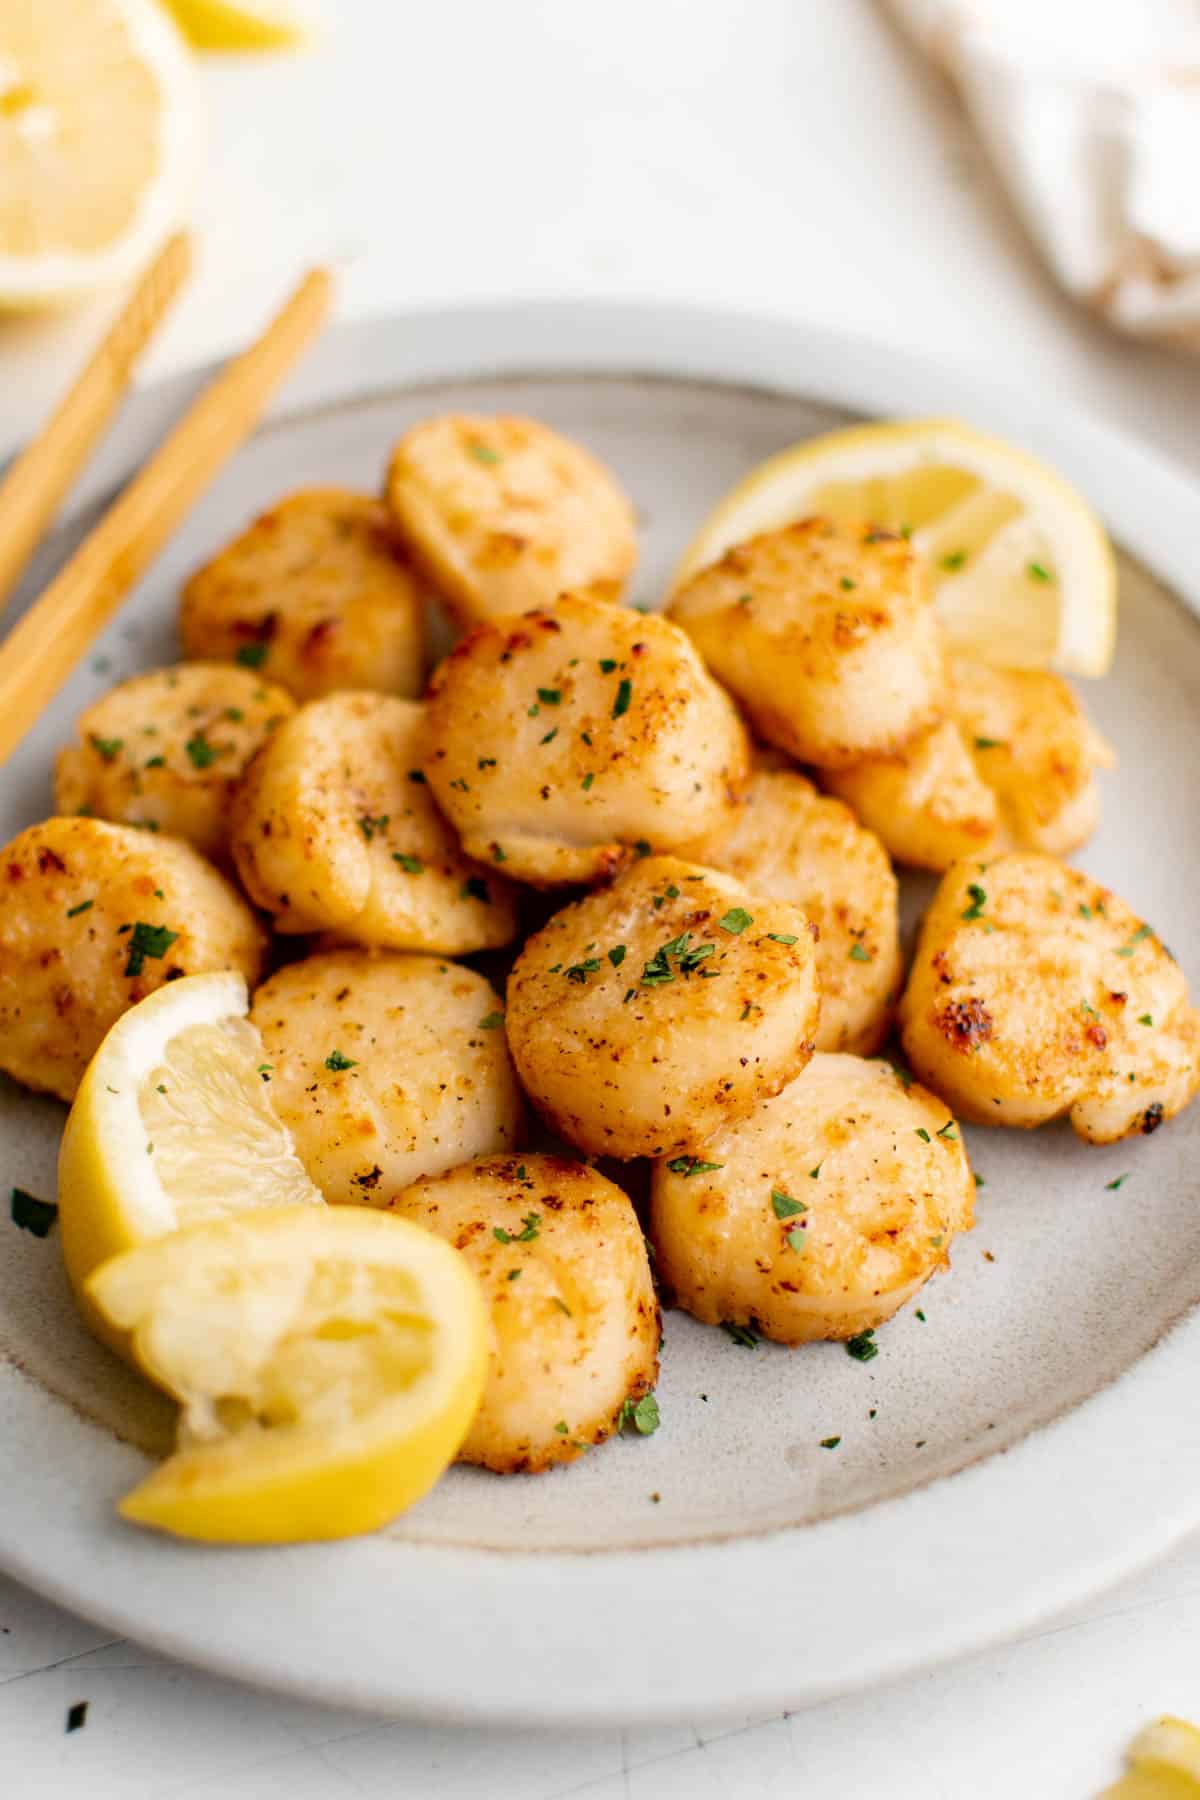 Broiled sea scallops on a plate for serving.